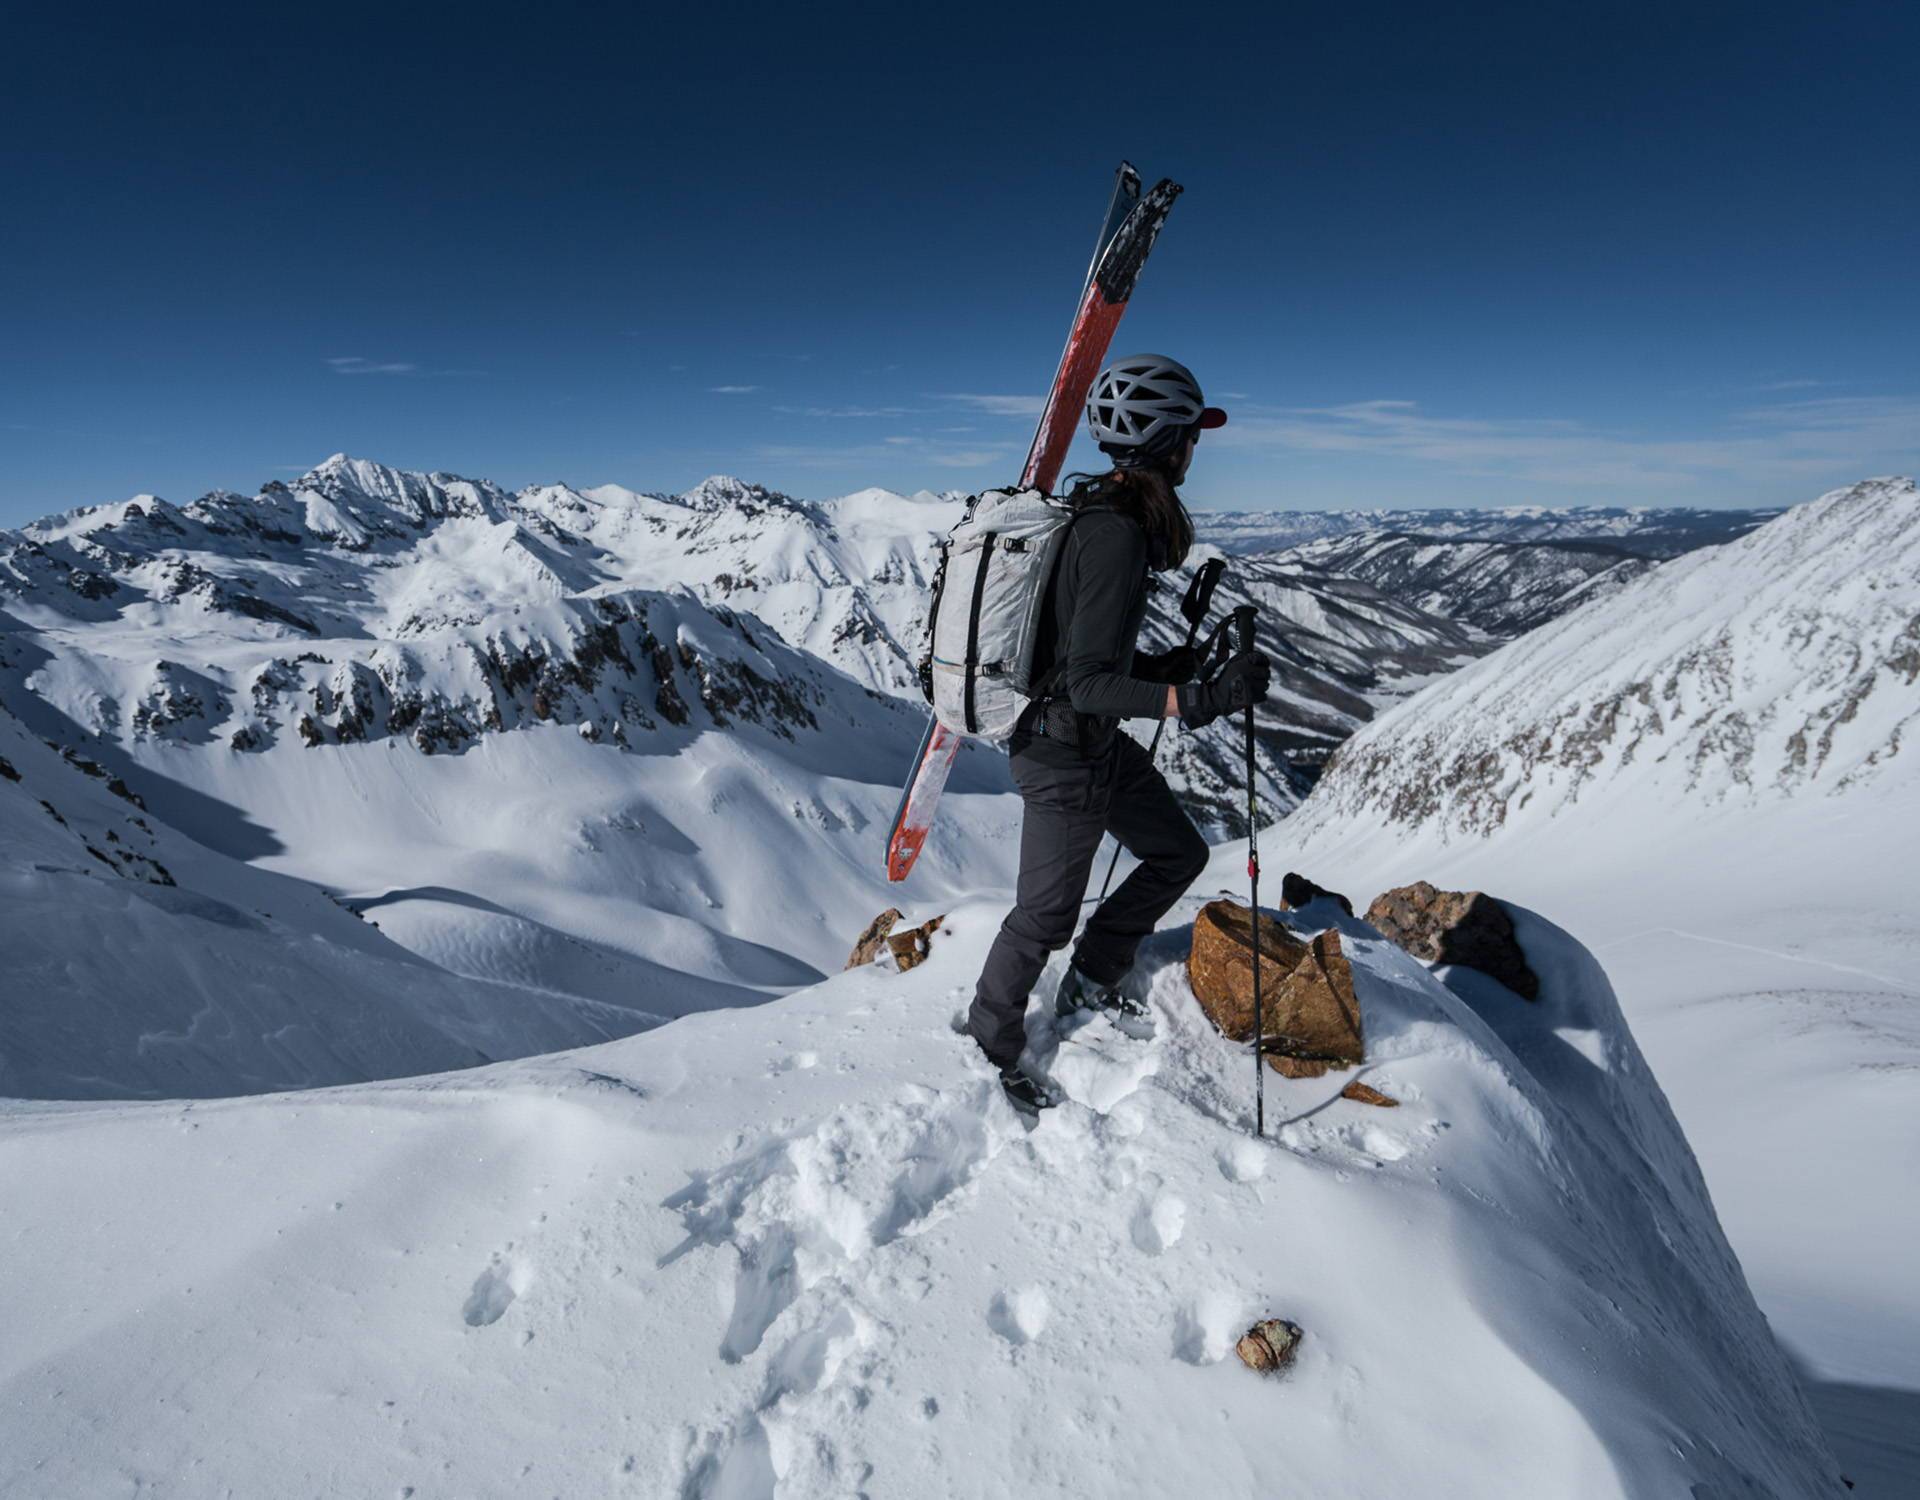 A skier standing on top of a snow covered mountain.